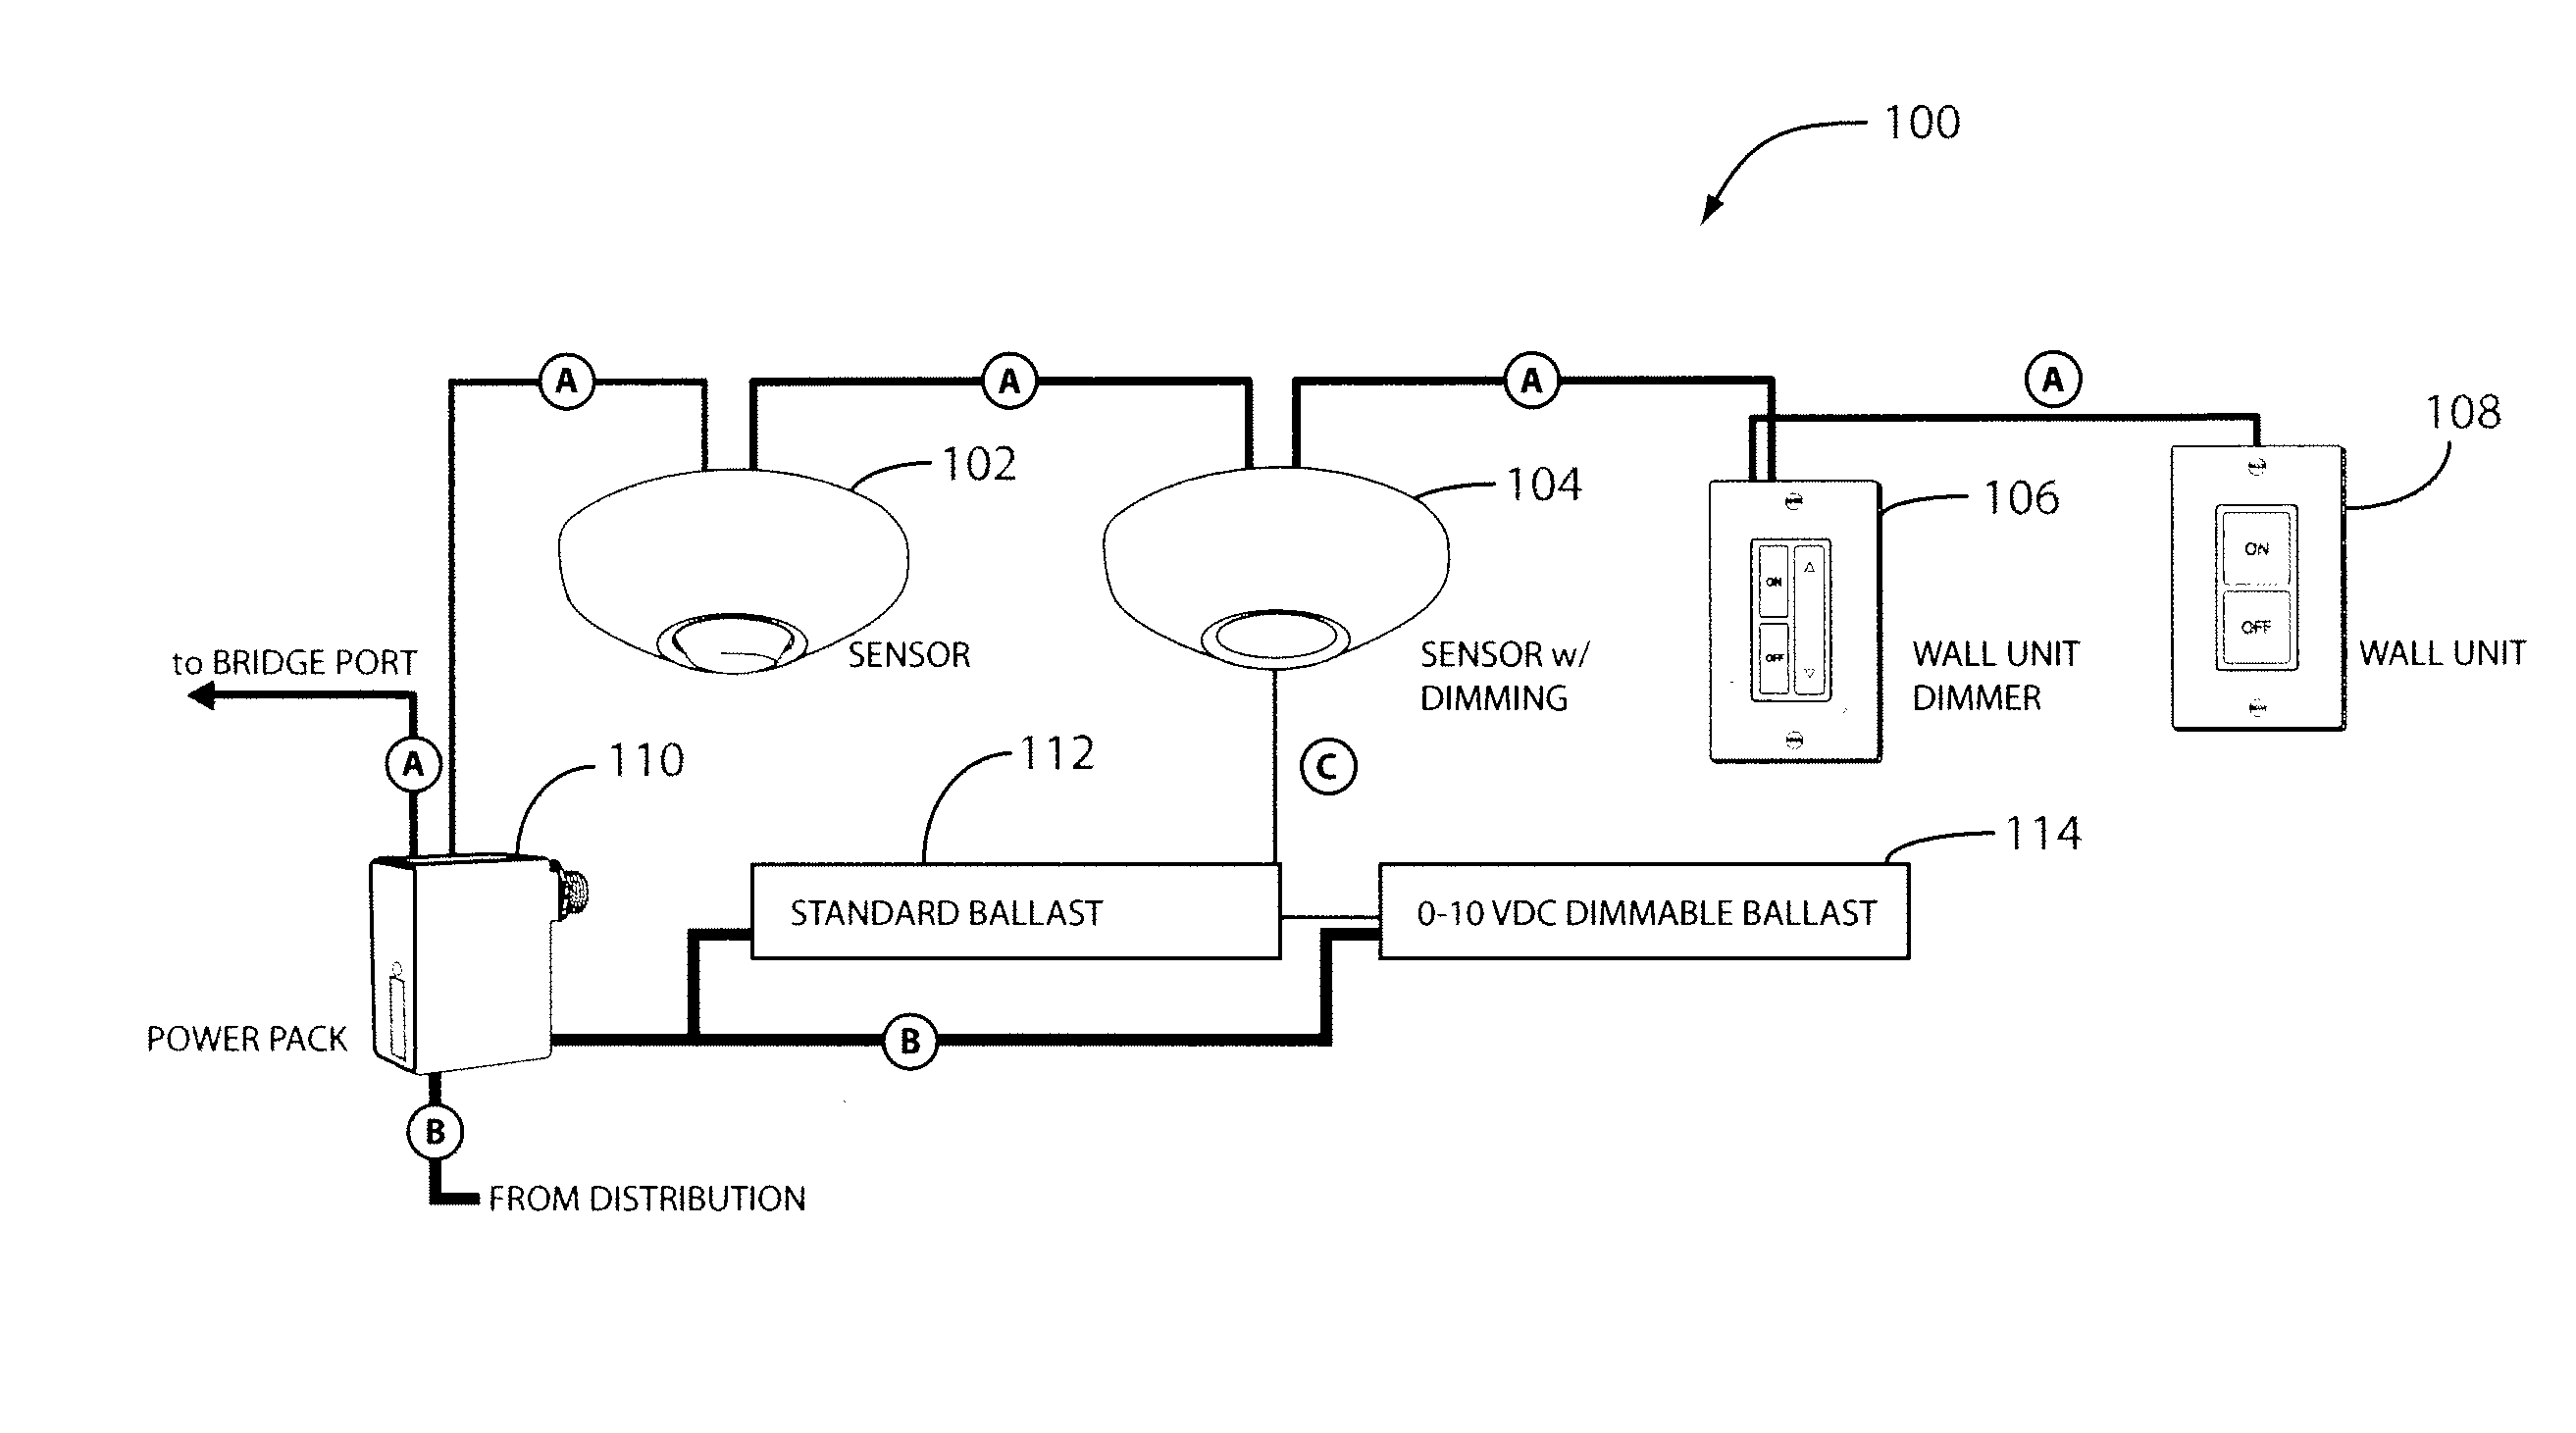 Networked, wireless lighting control system with distributed intelligence